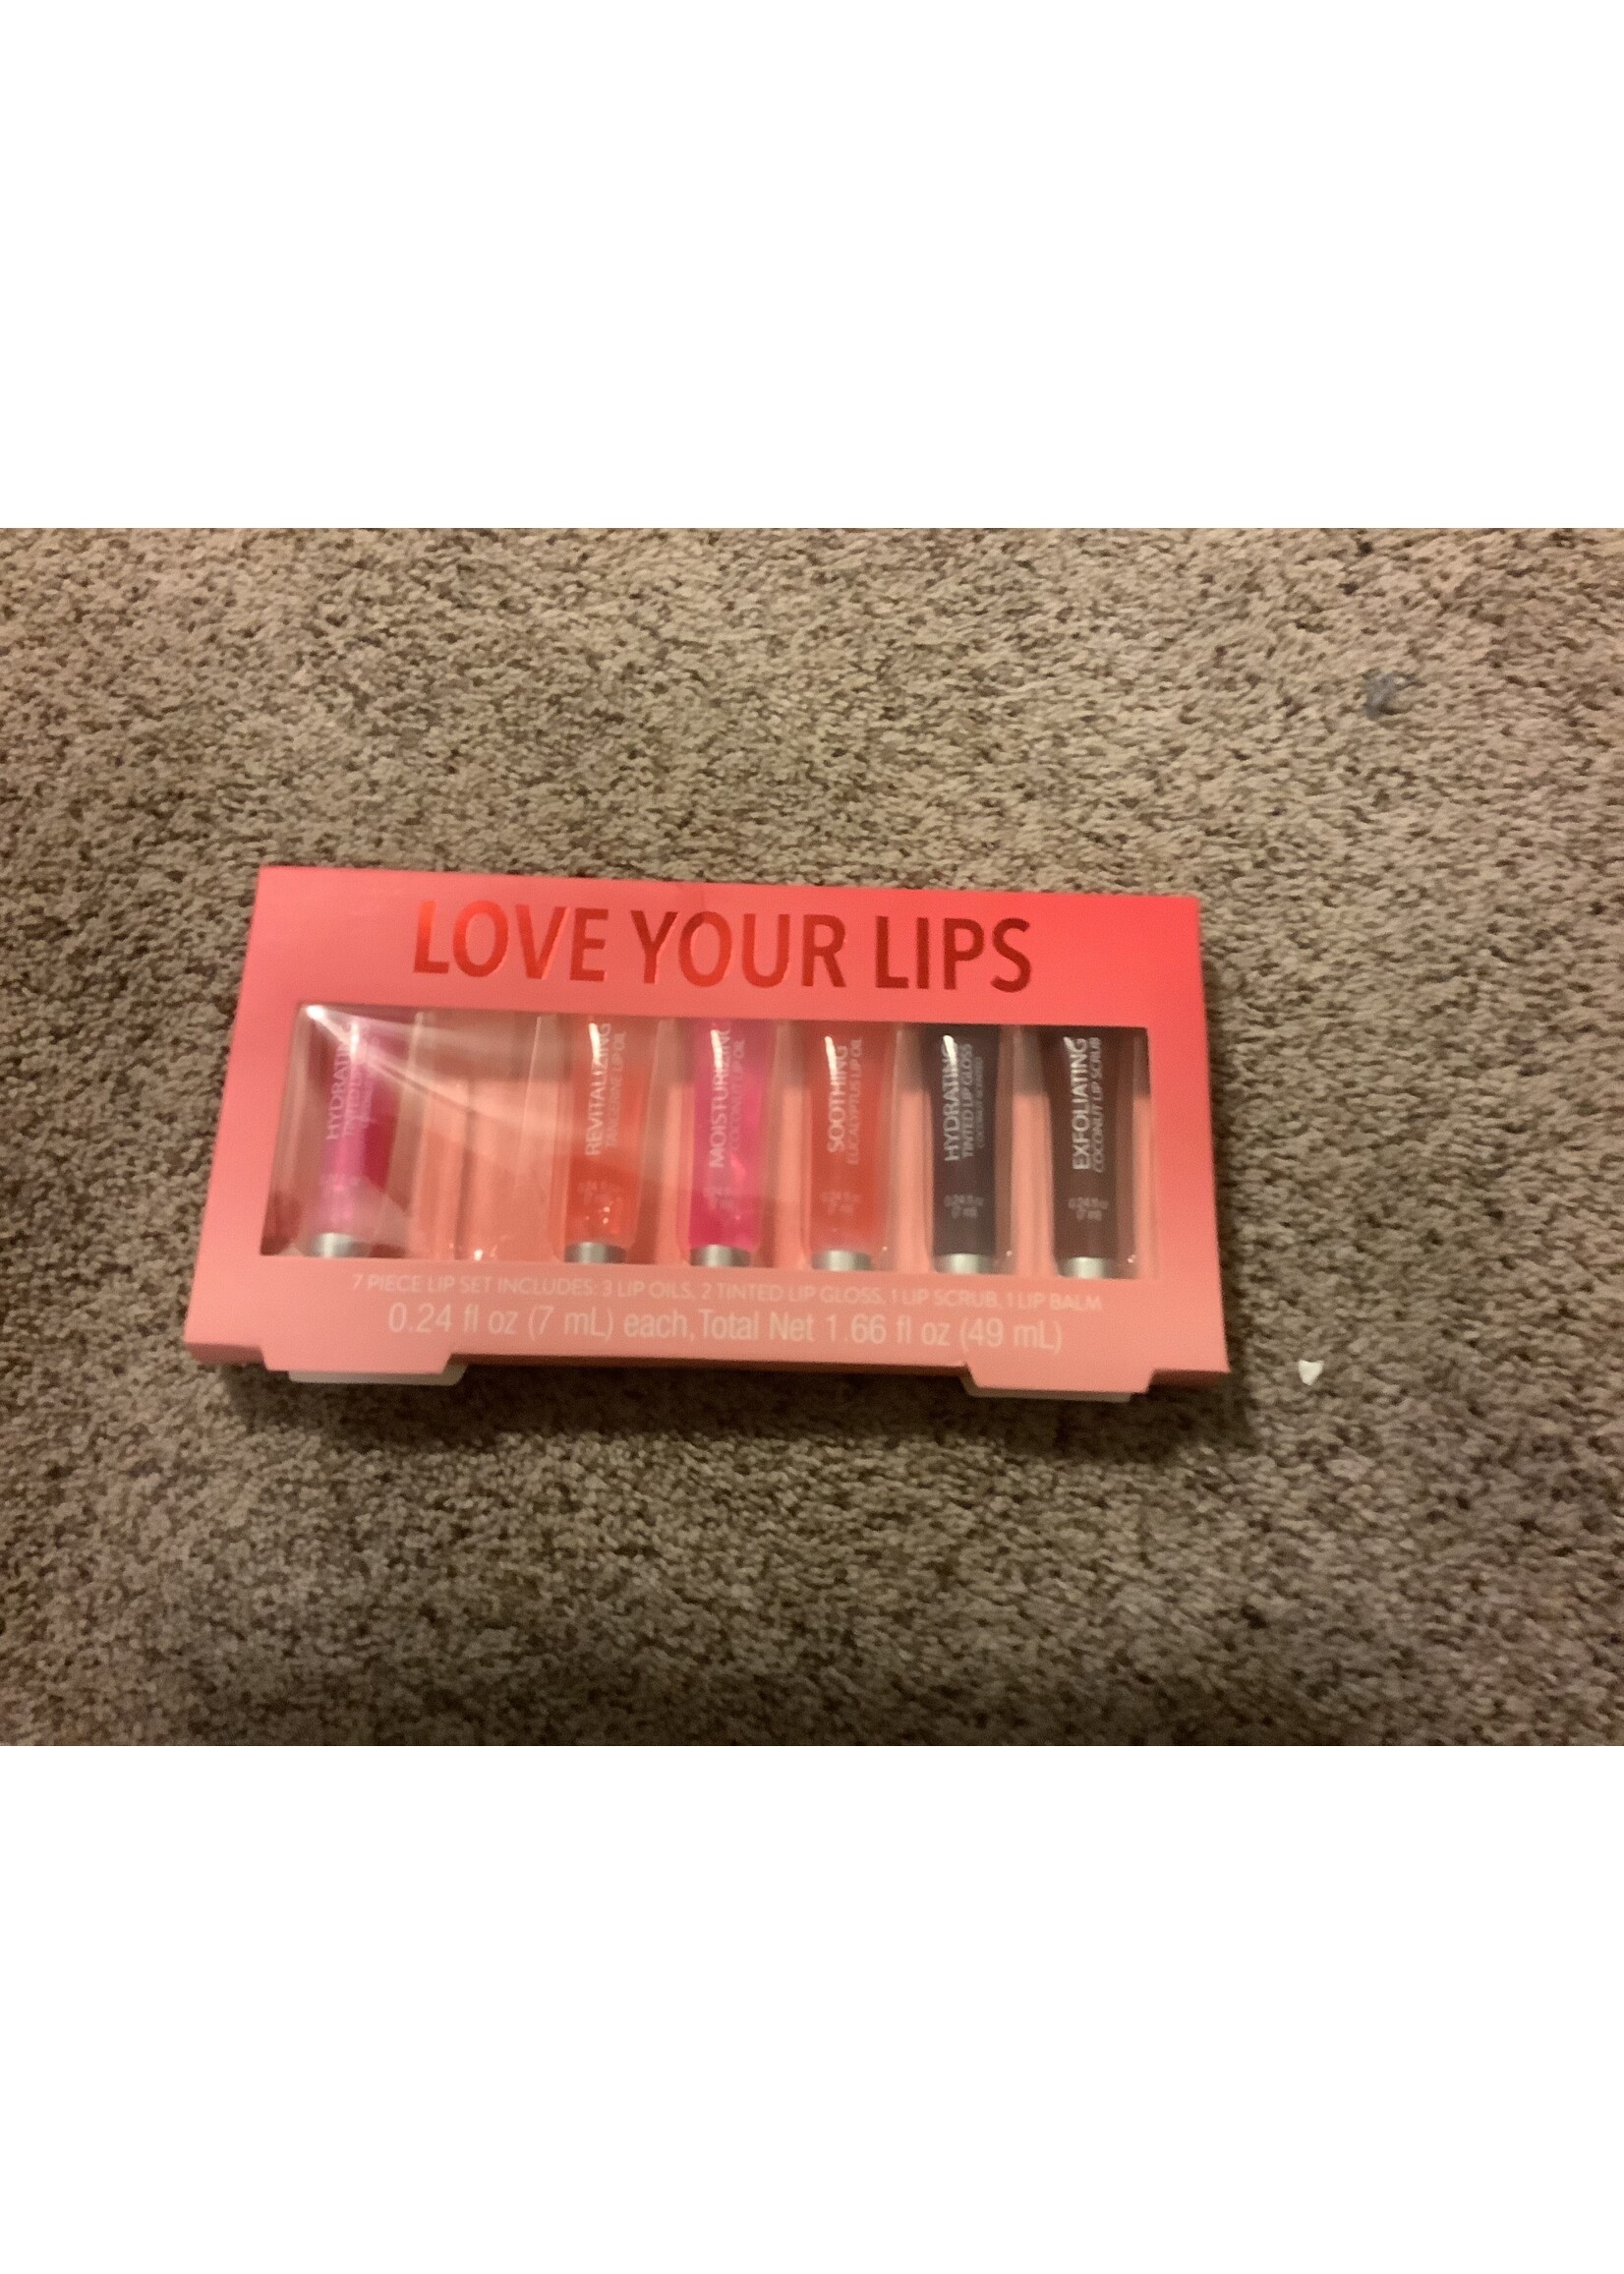 *Missing One Love Your Lips Juicy Tube Lip Gloss Gift Set - 1.65 fl oz/7ct